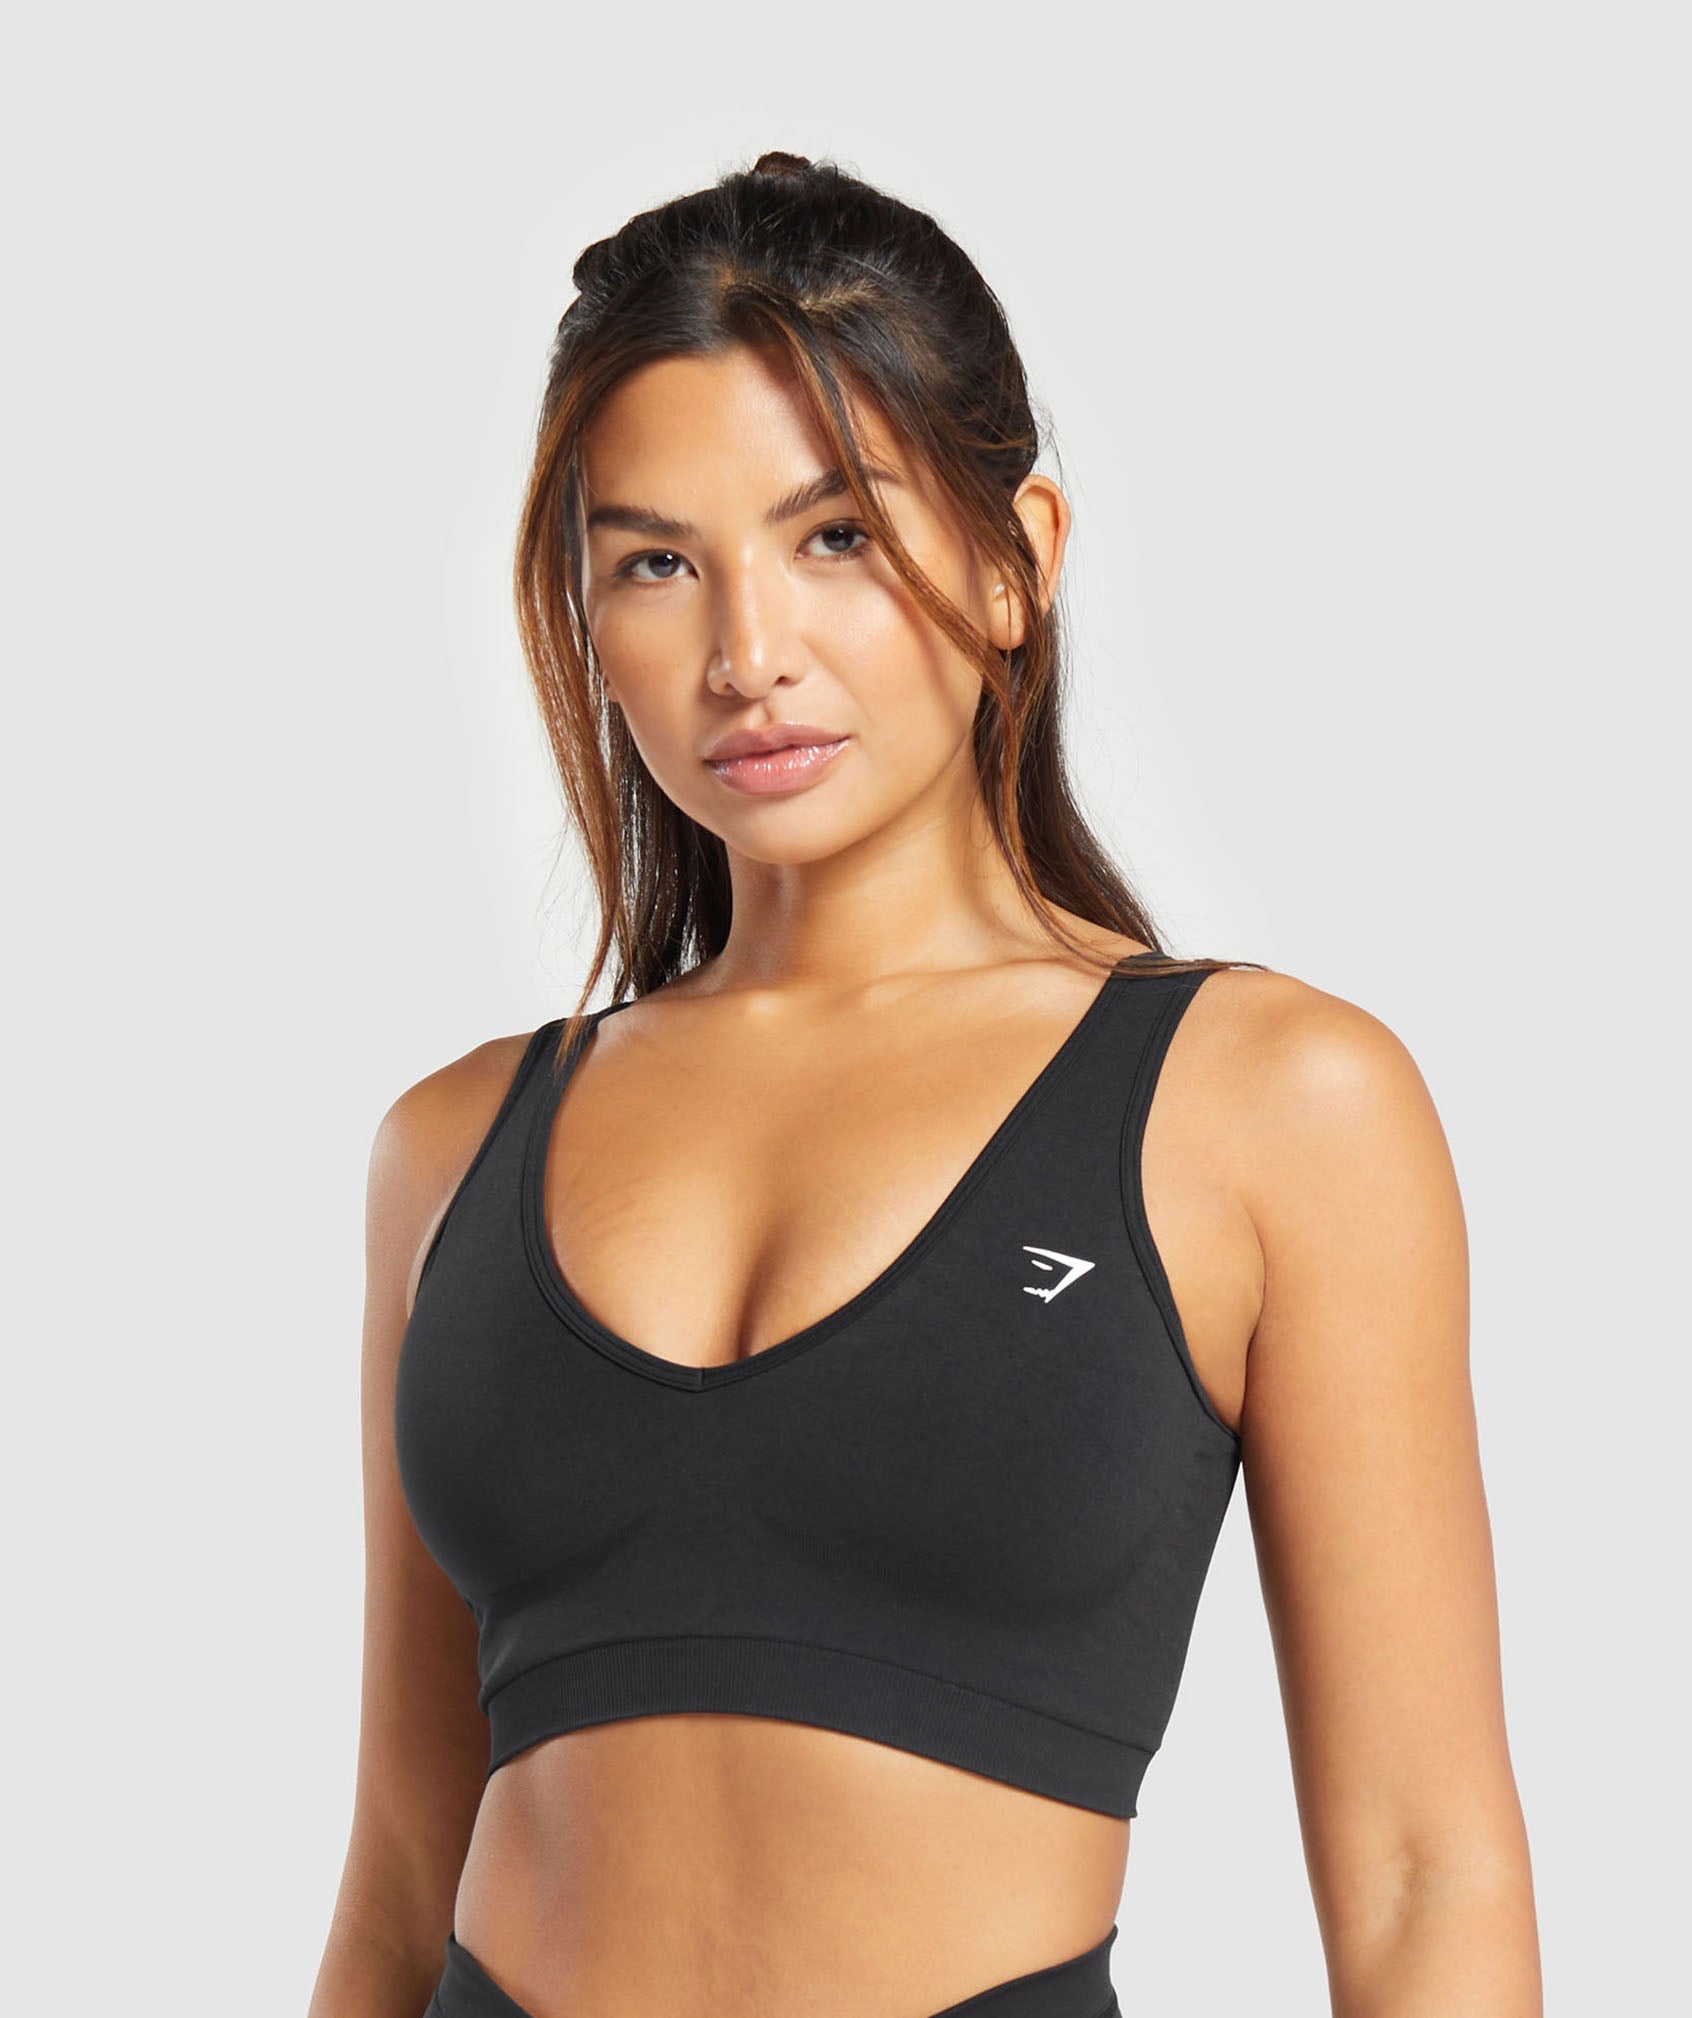 All Products, Women's Workout Clothes